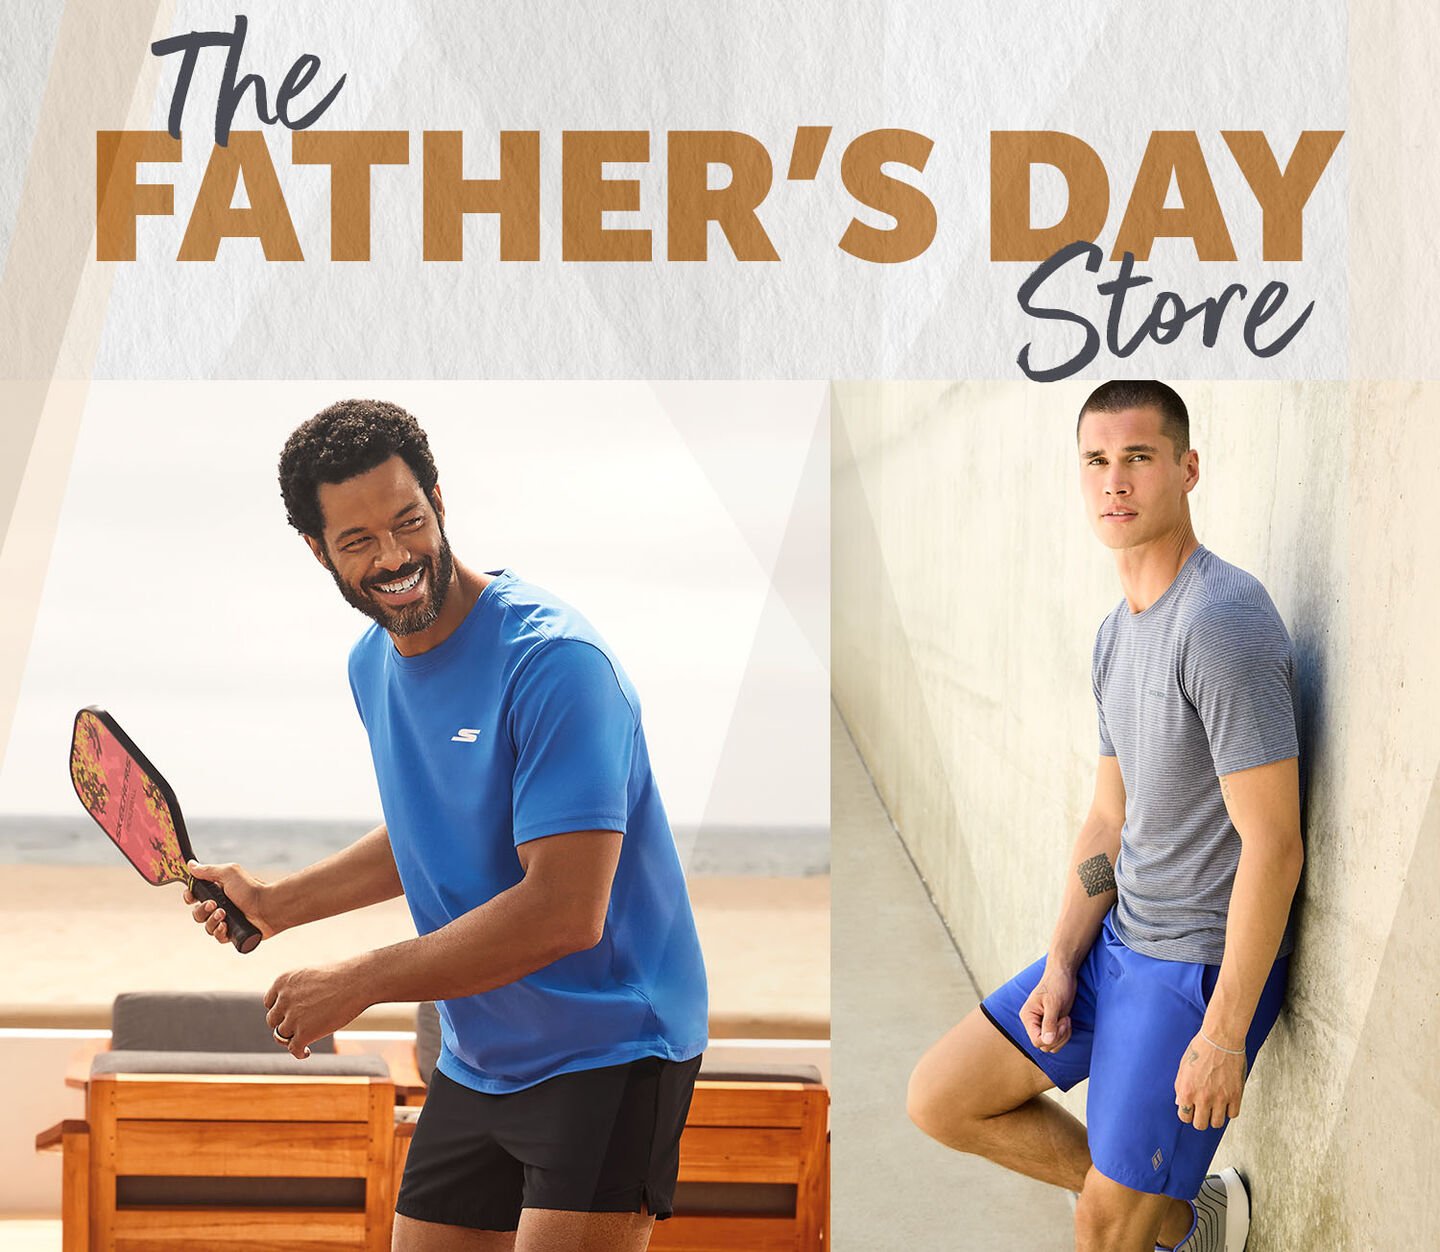 The Father's Day Store